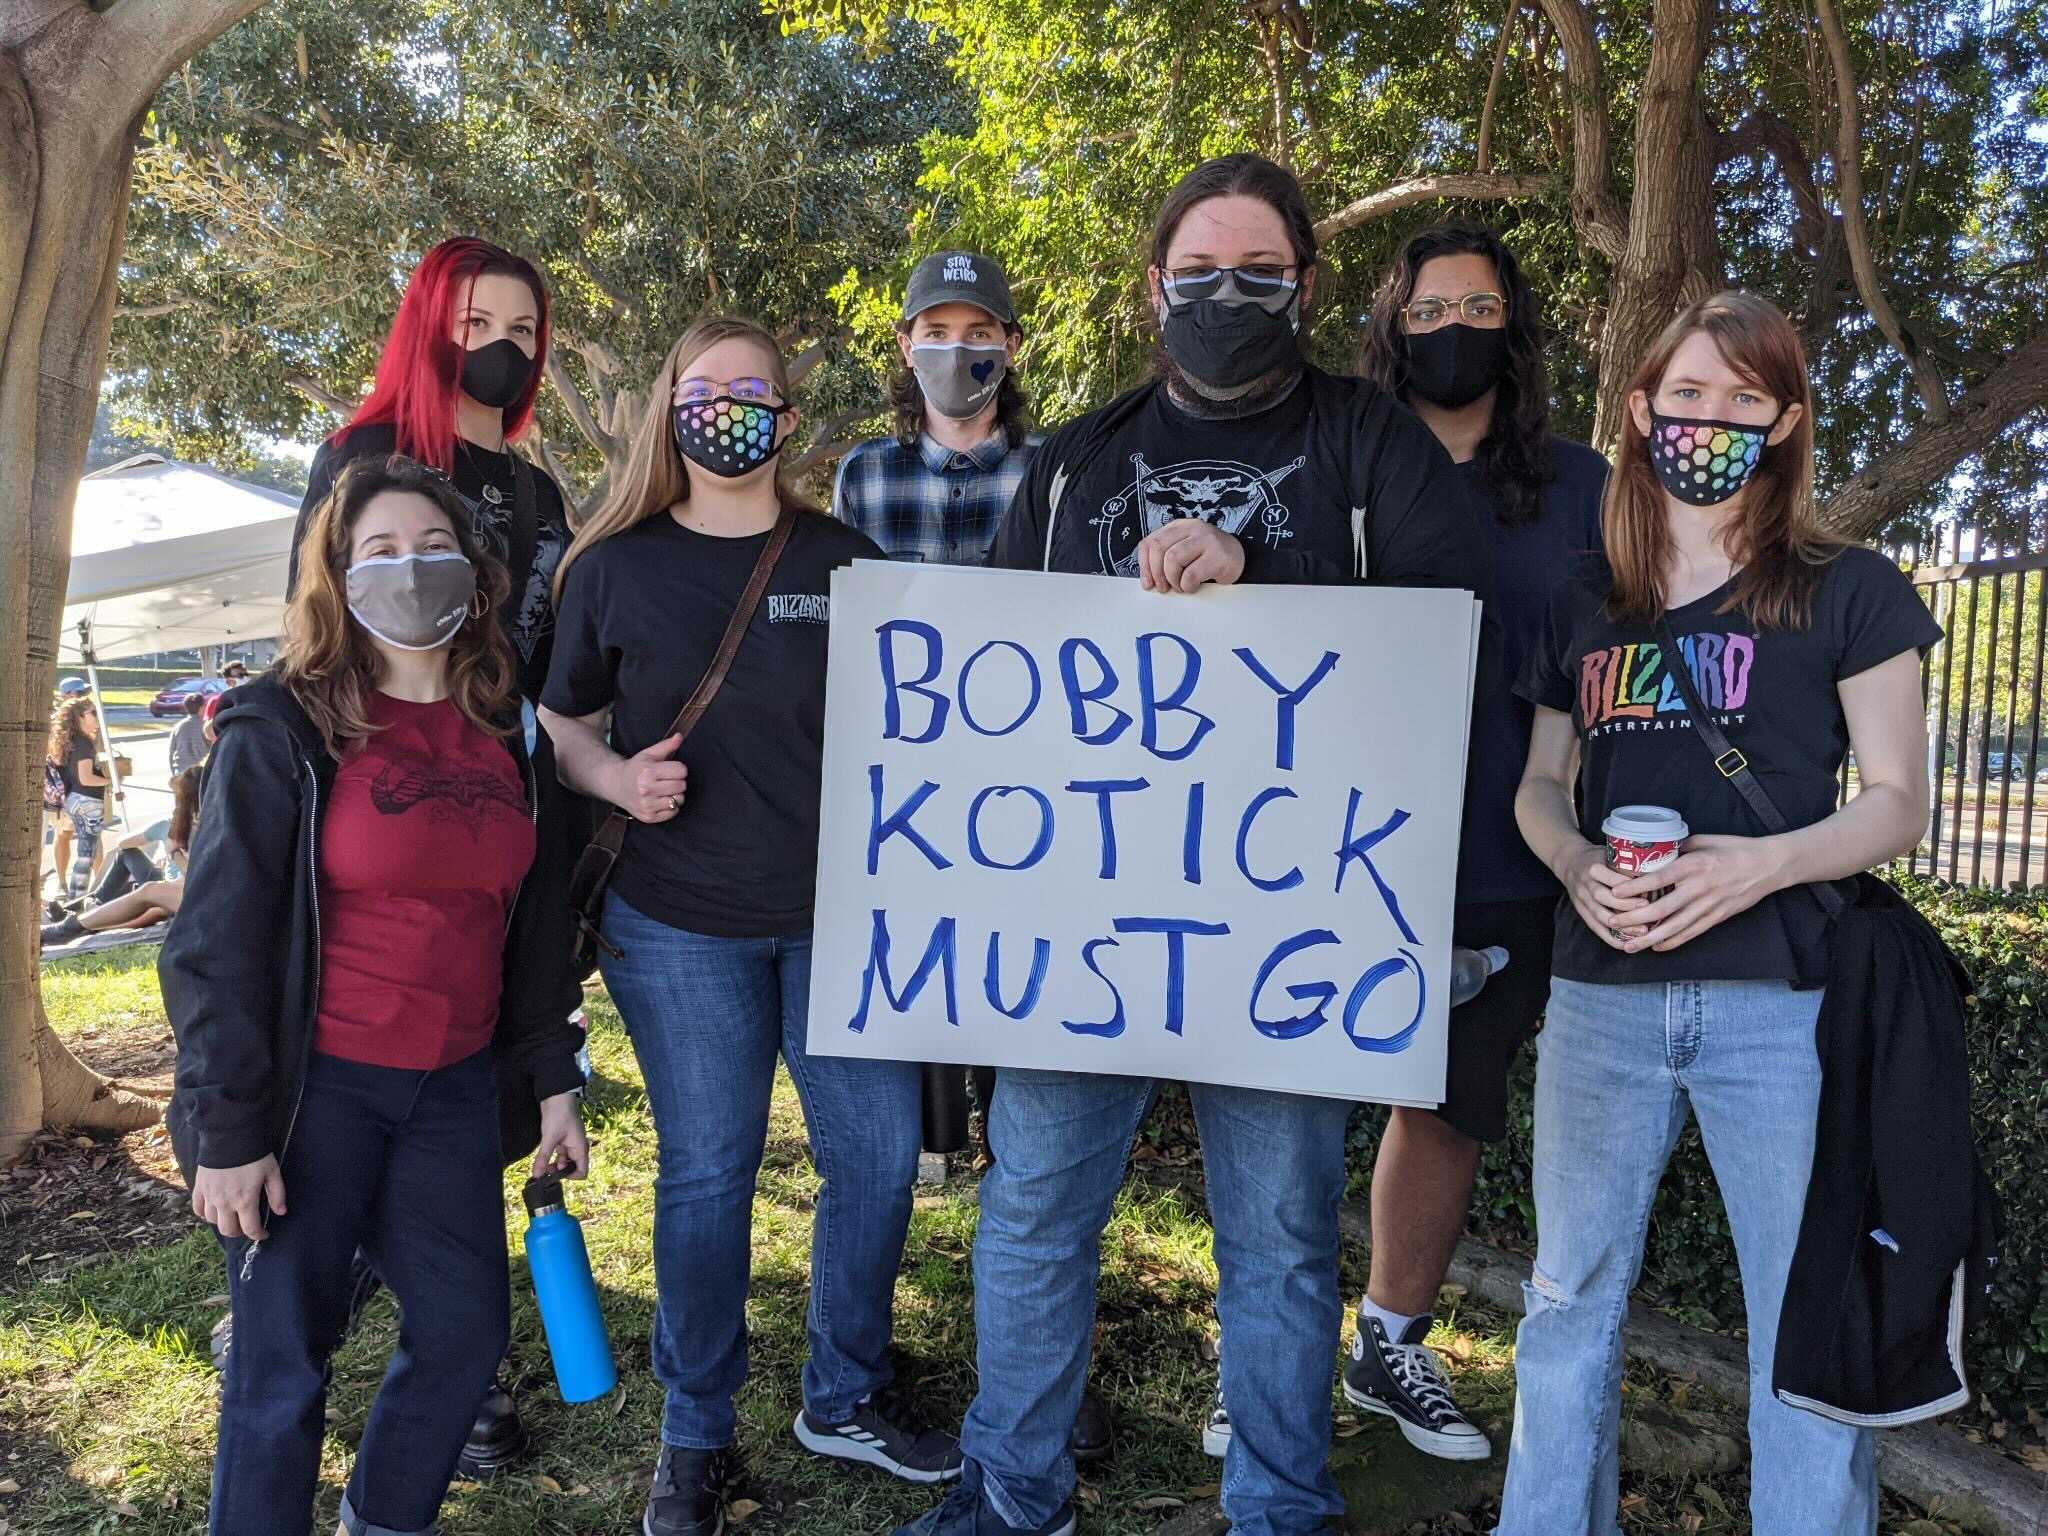 workers/supporters holding a sign that says “bobby kotick must go”